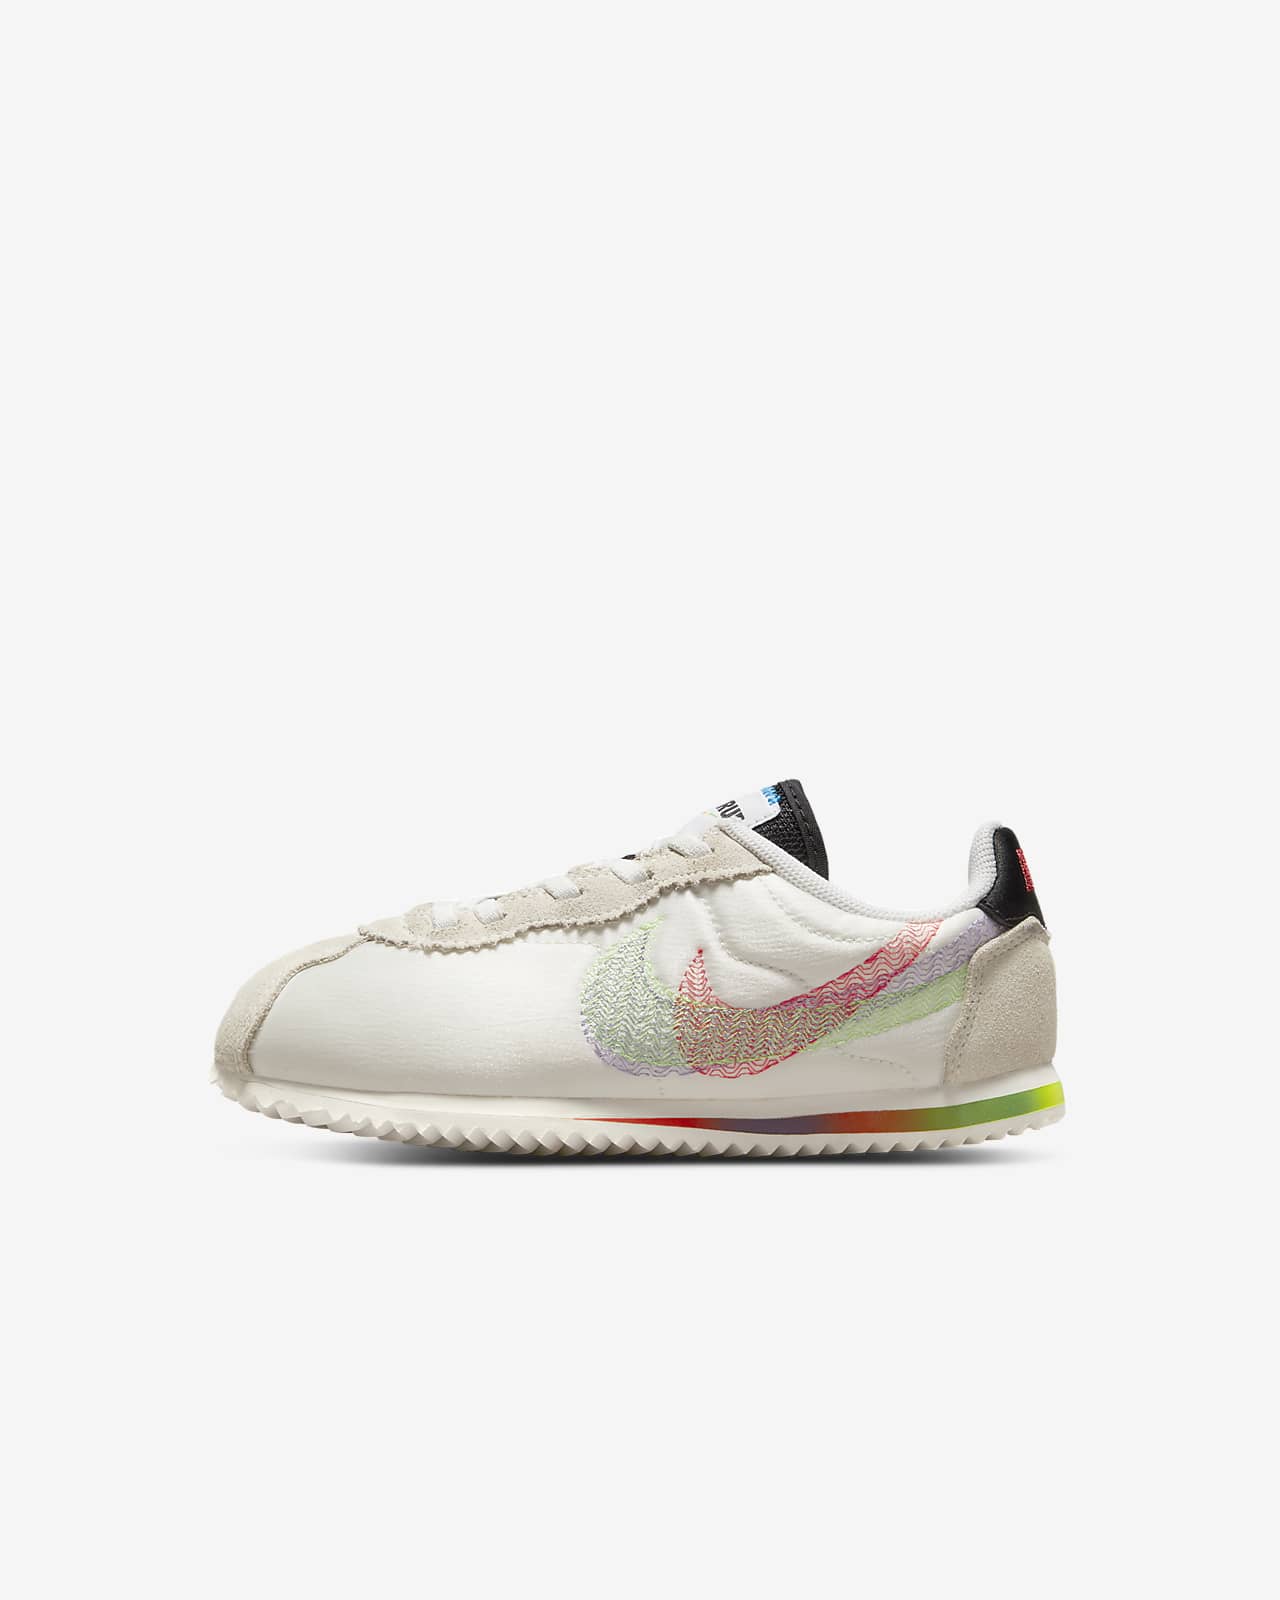 Nike Cortez Be True Younger Kids' Shoes